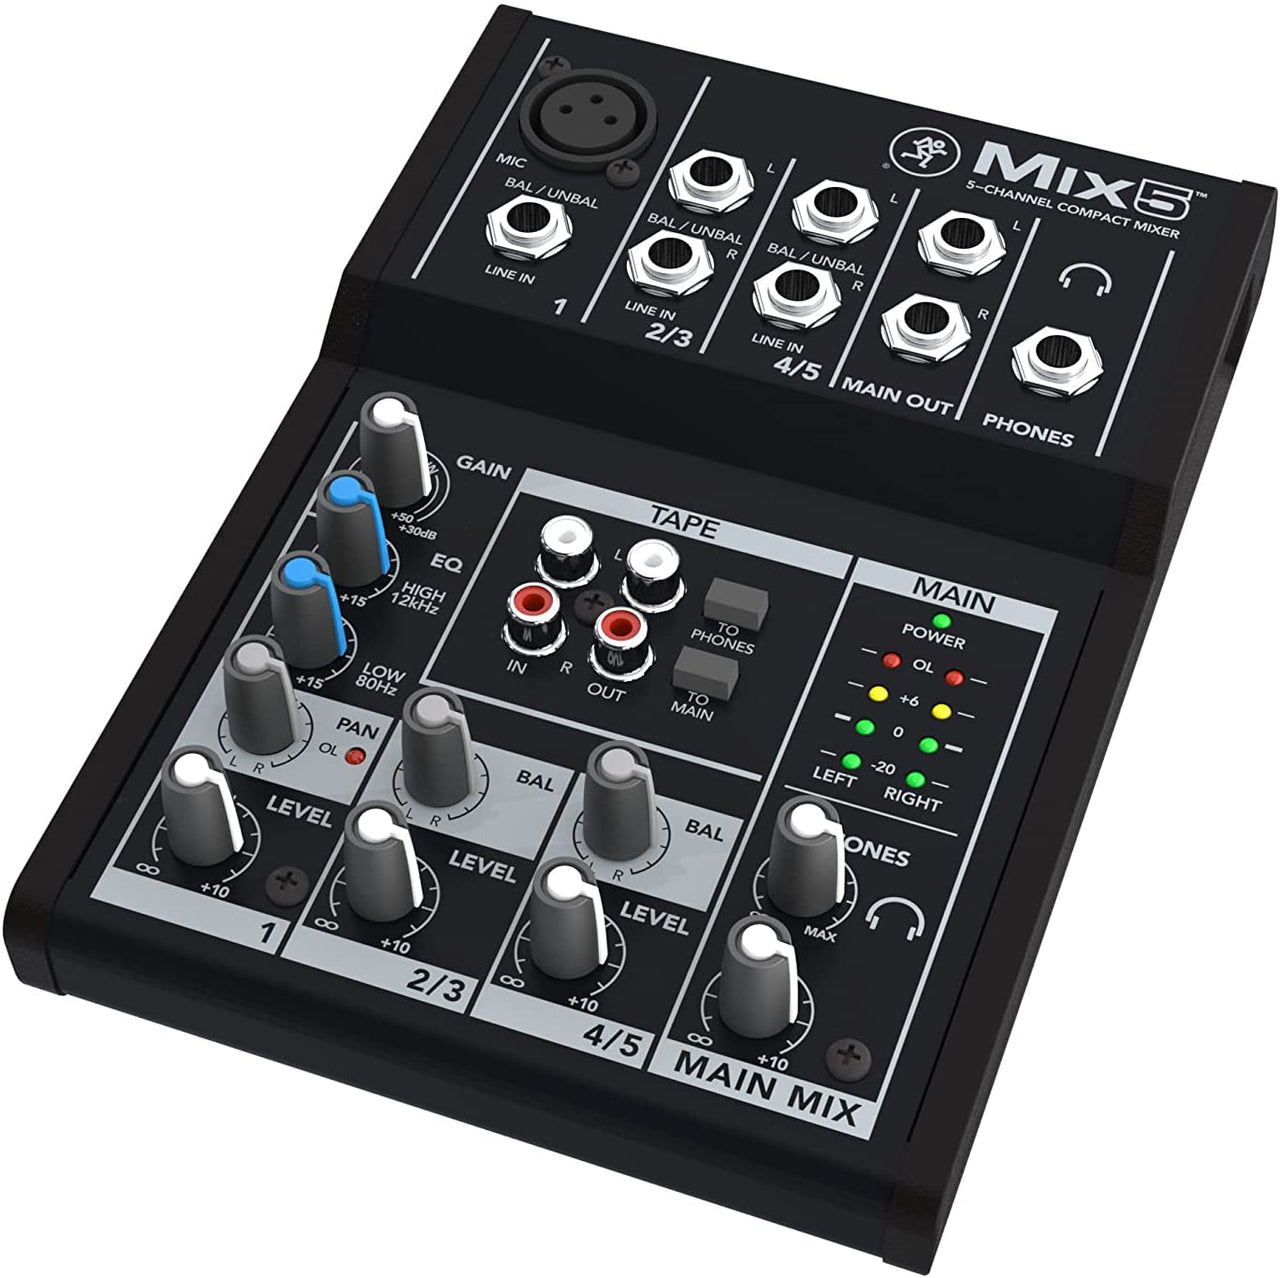 Mackie Mix5 Mix Series, 5-Channel Compact Mixer with Studio-Level Audio Quality